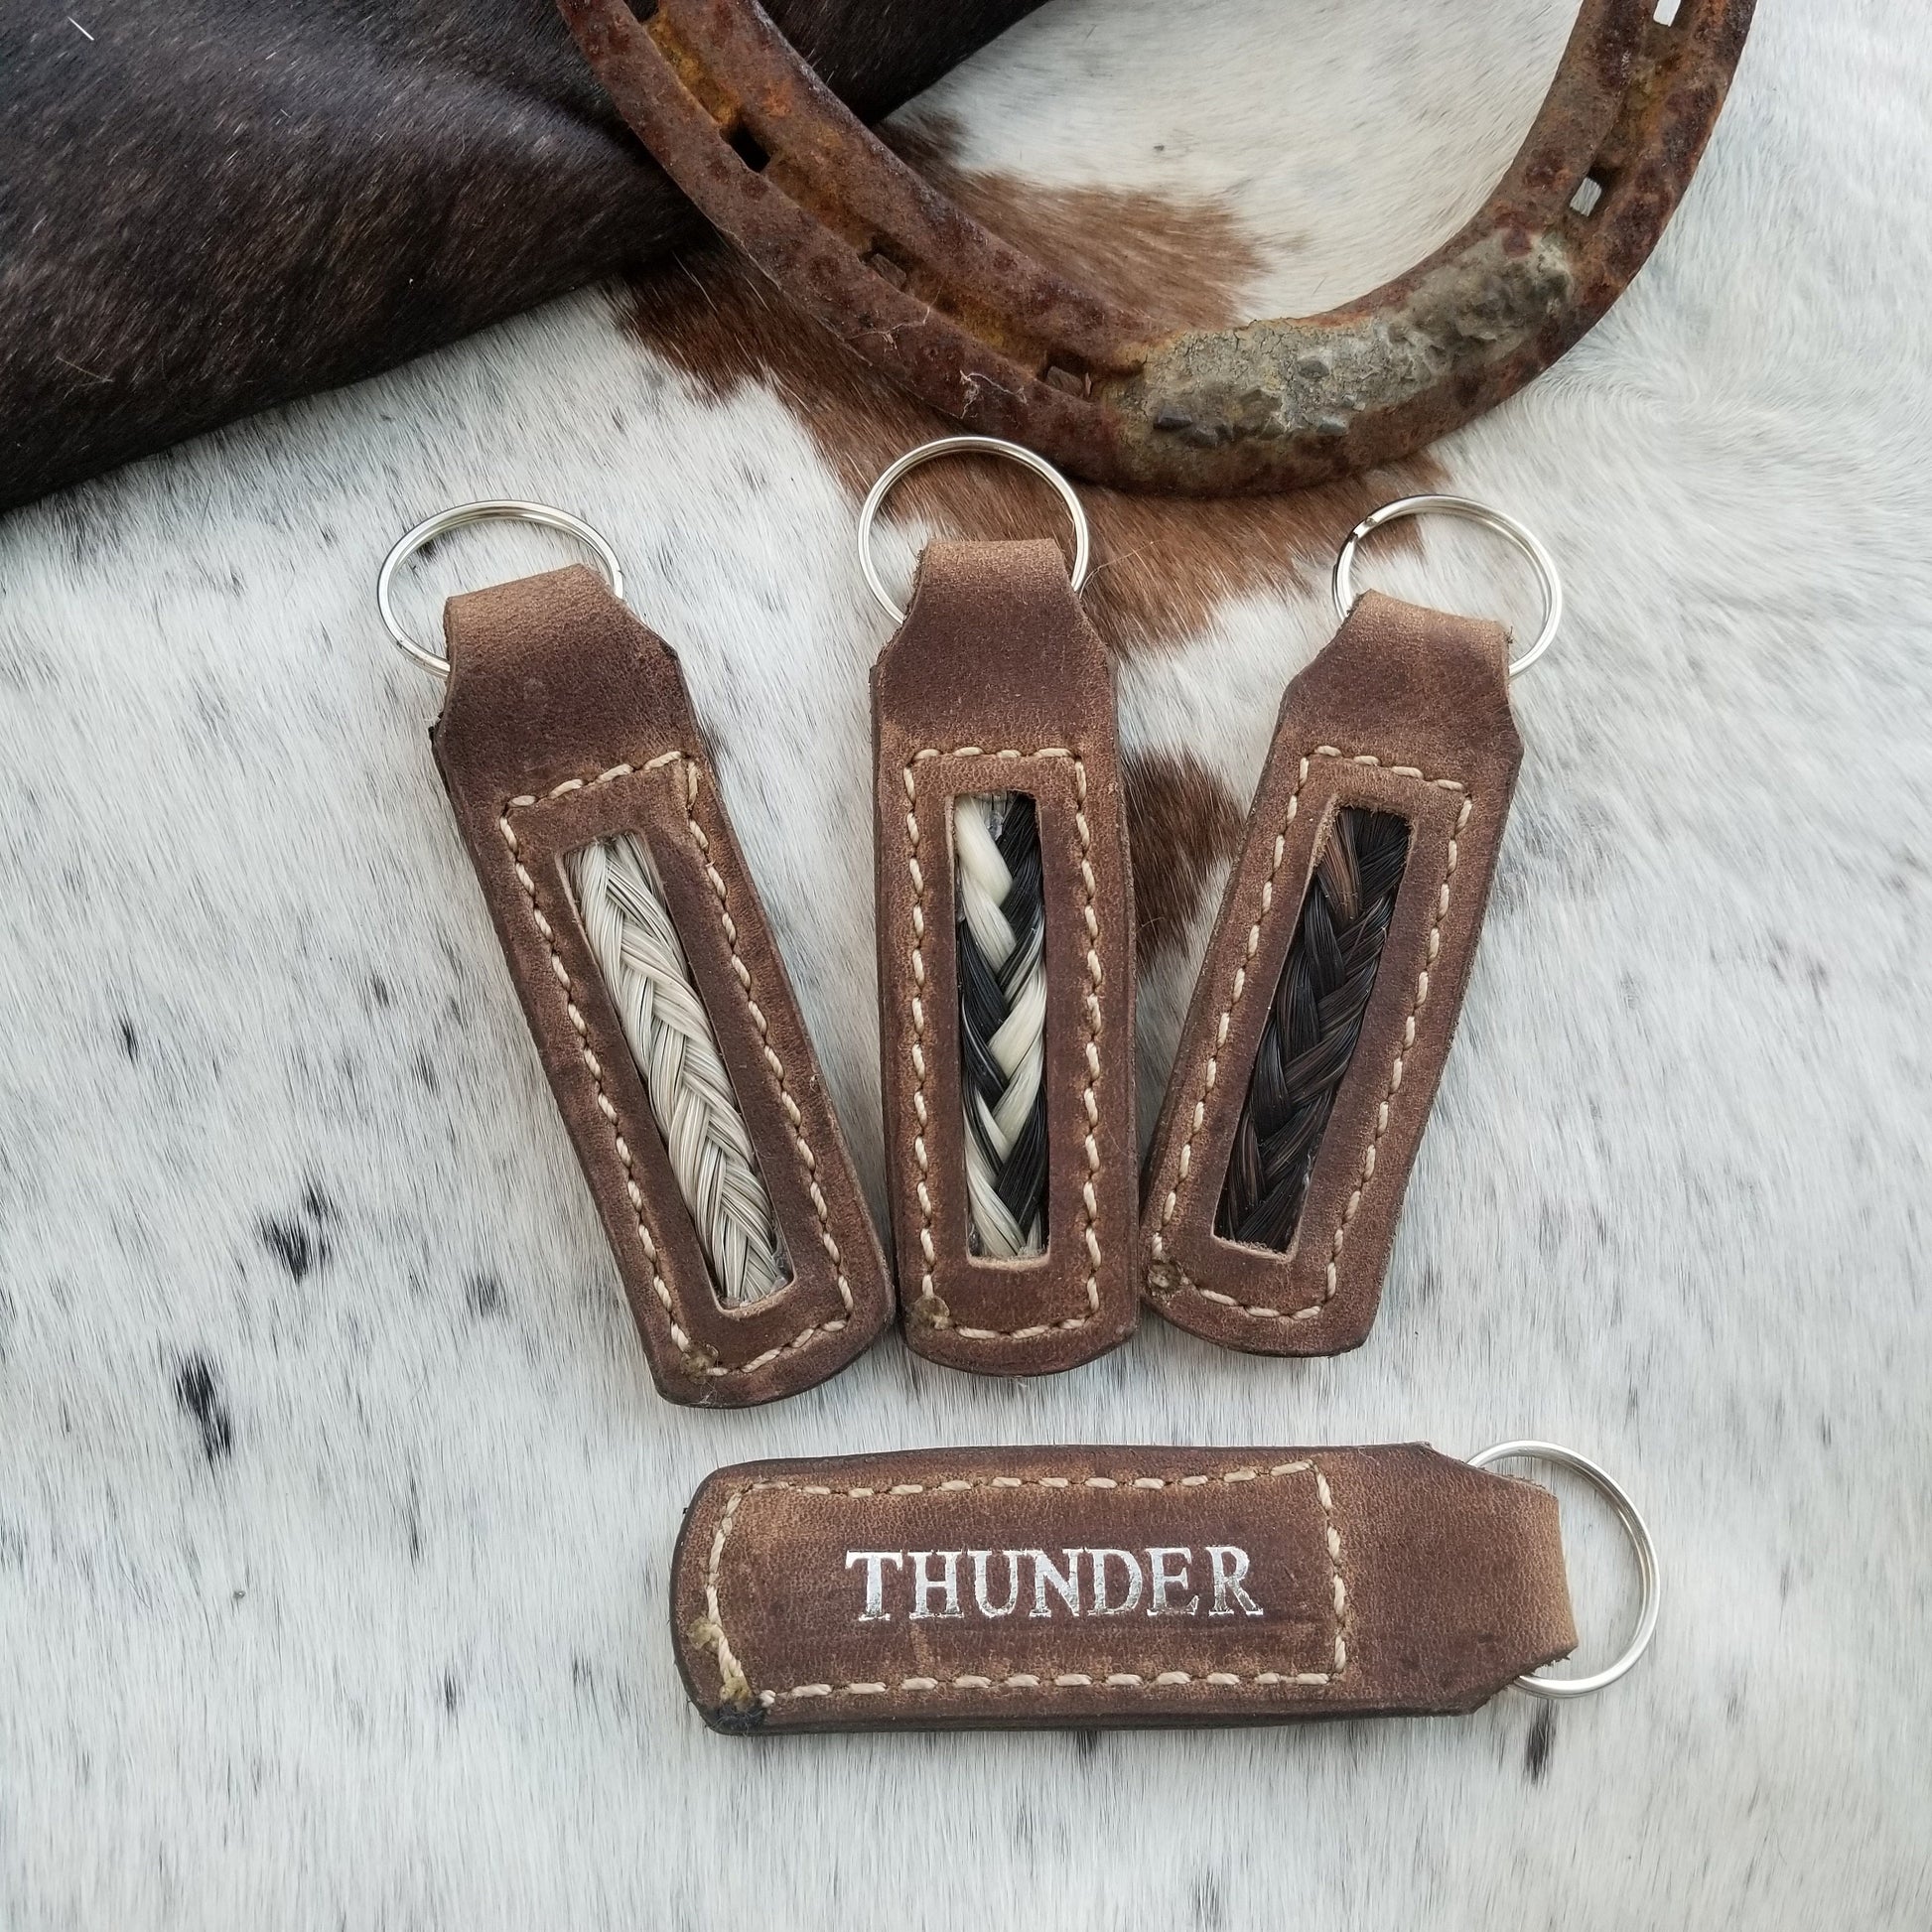 Custom MAIL IN Leather Horse Hair Key Chain Memorial Keepsake Made to Order with Horses Name with Fast Processing Perfect Horse Lover Gift